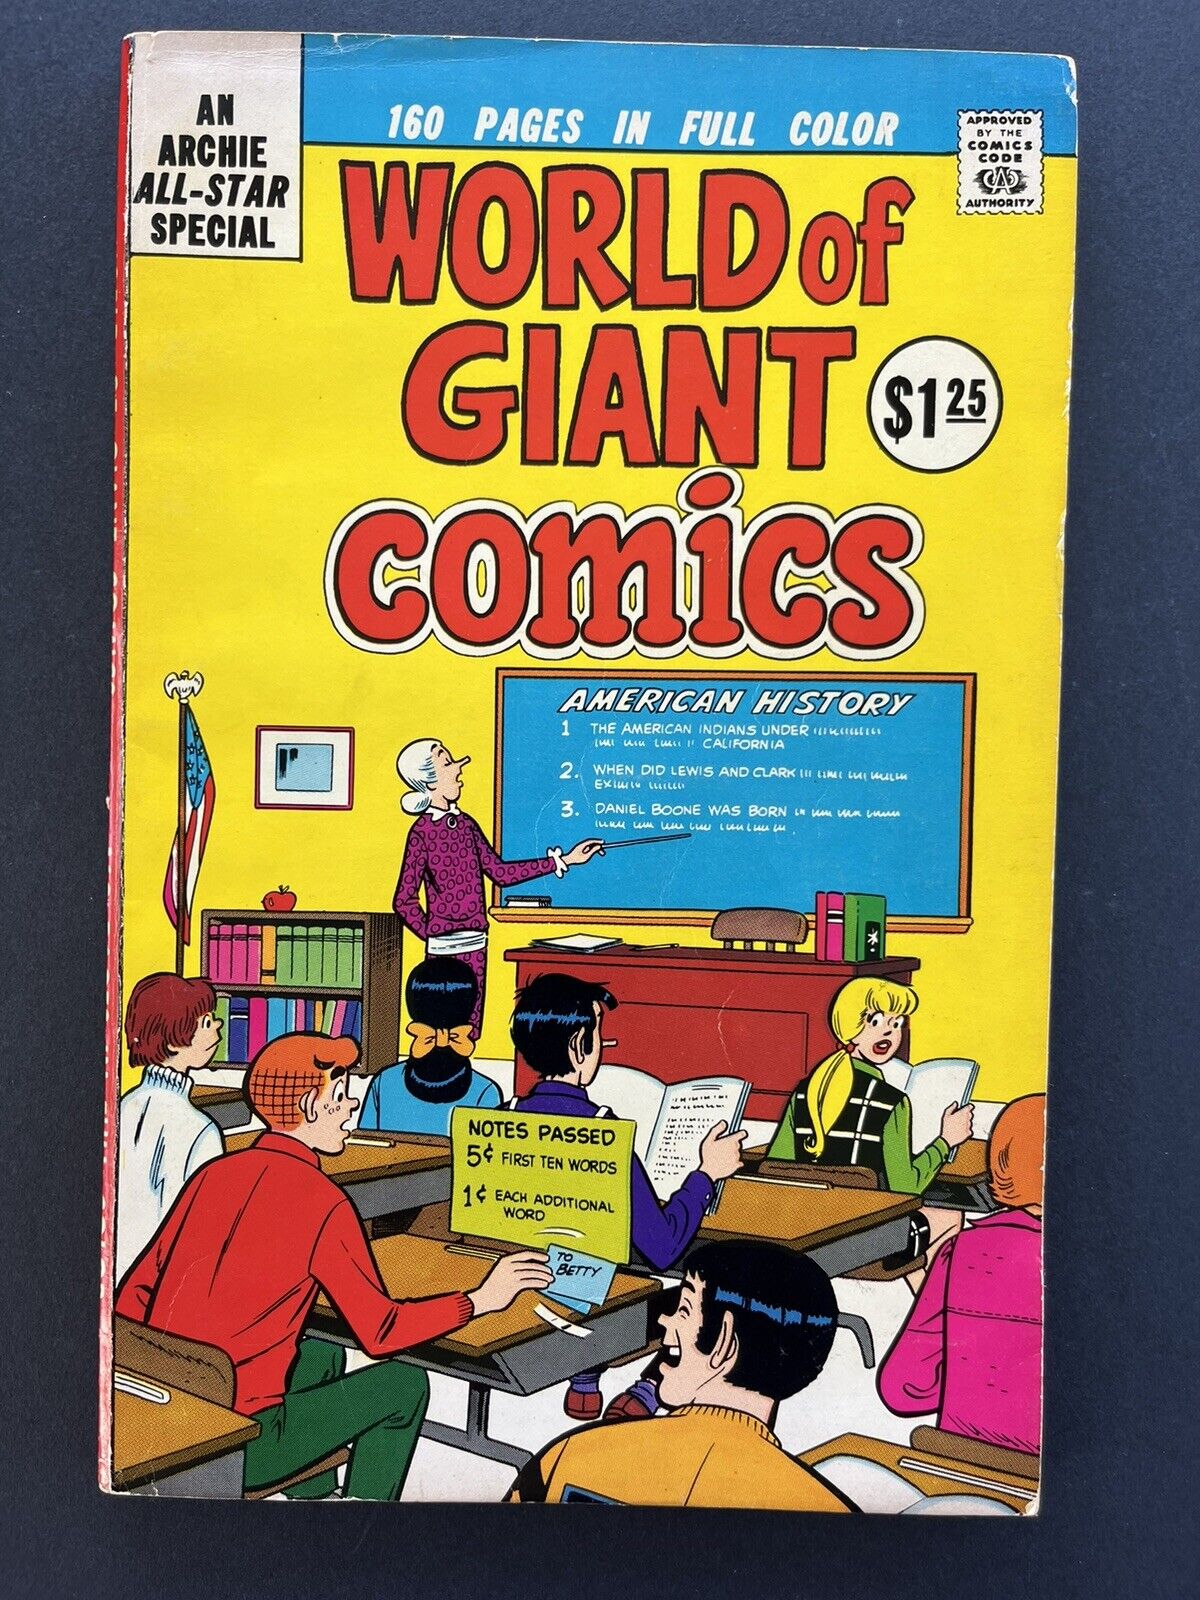  1975 Archie All-Star Special, World of Giant Comics